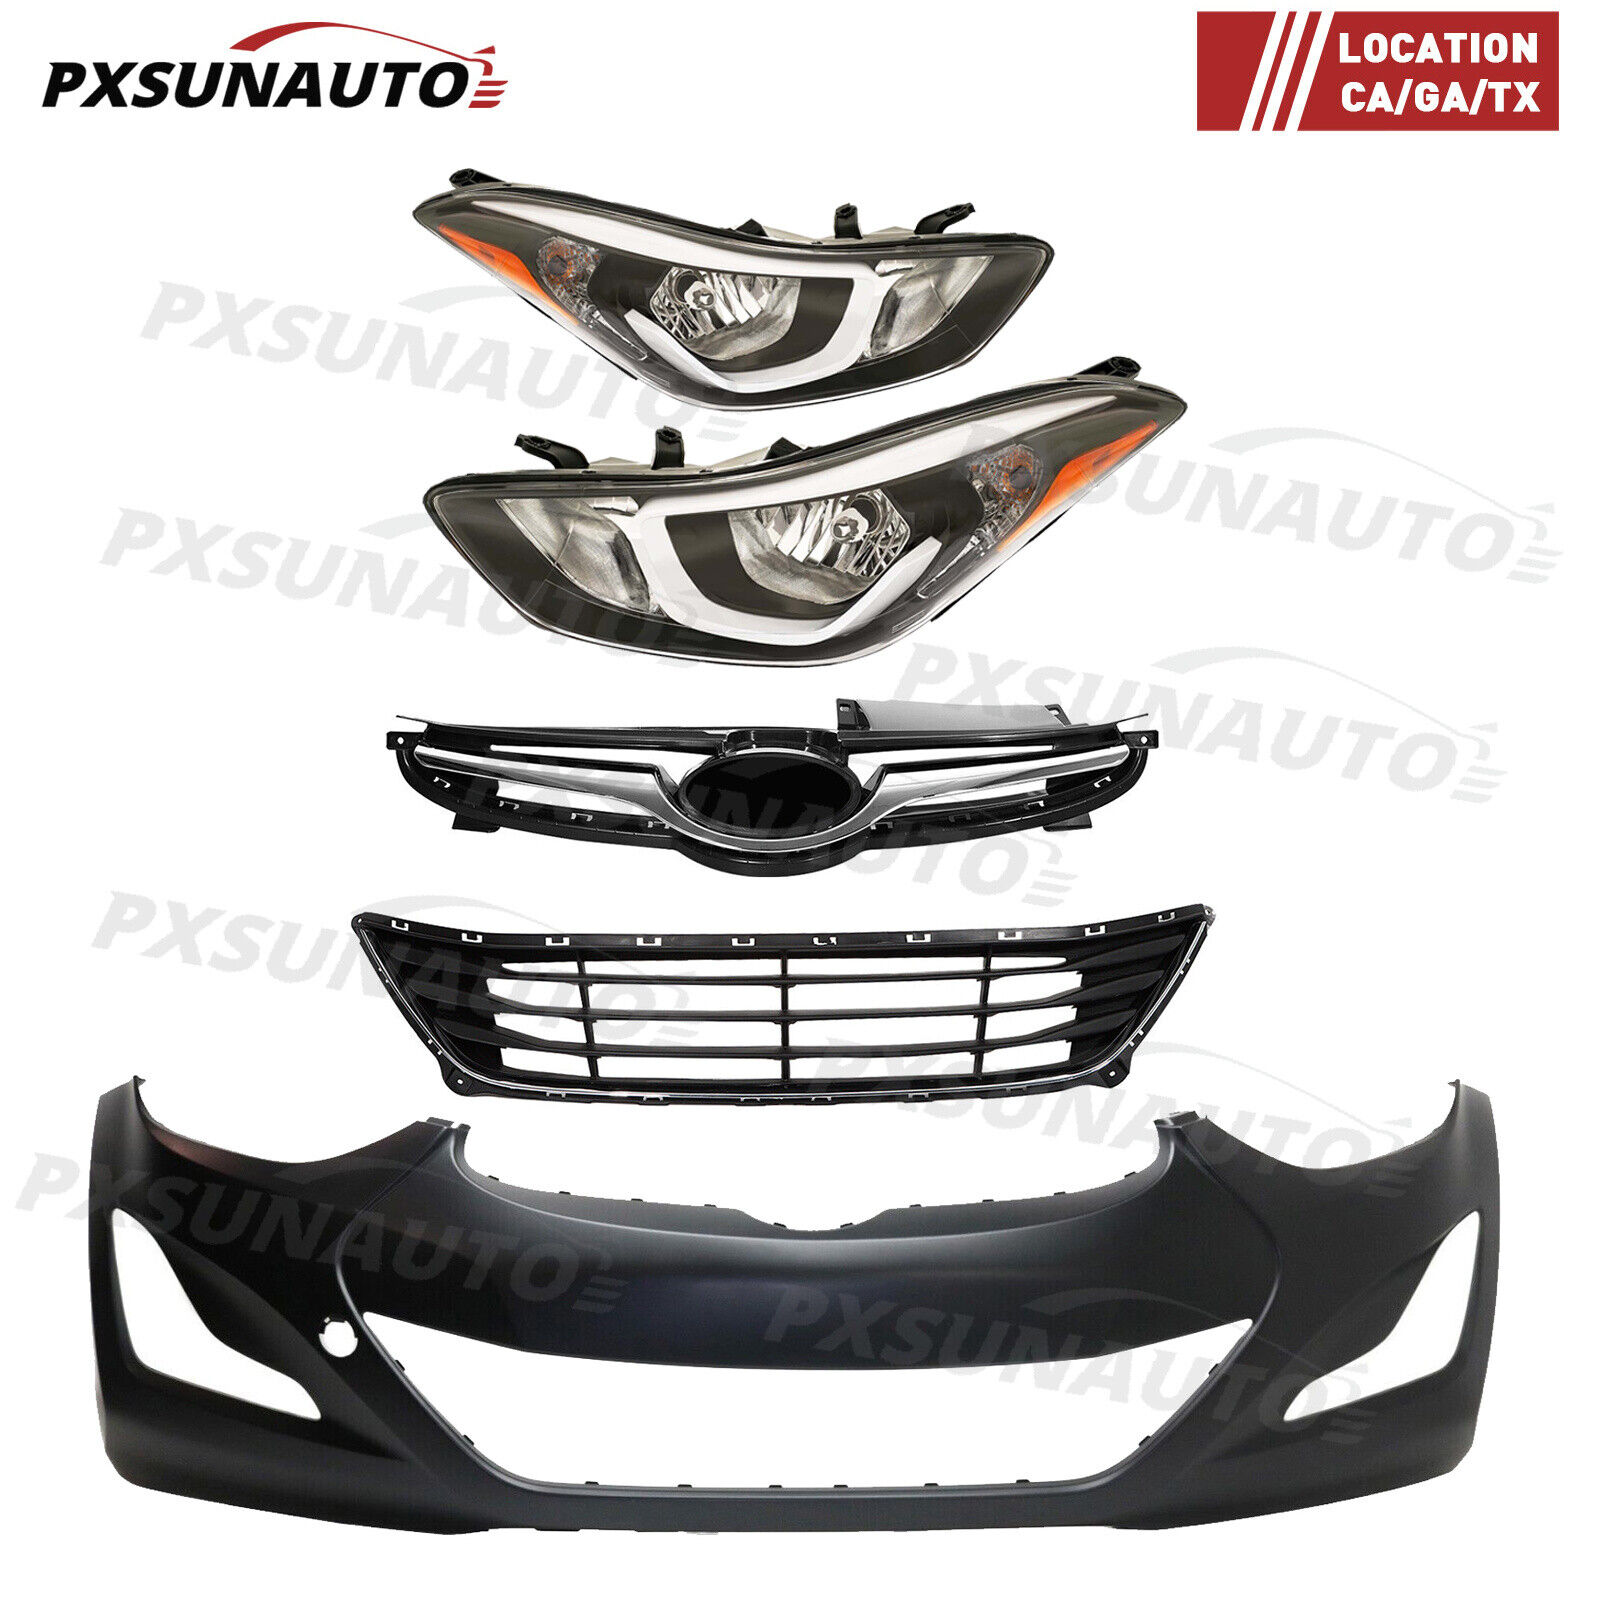 For 2014-2016 Hyundai Elantra Sedan Front Bumper Cover With Grille Headlights